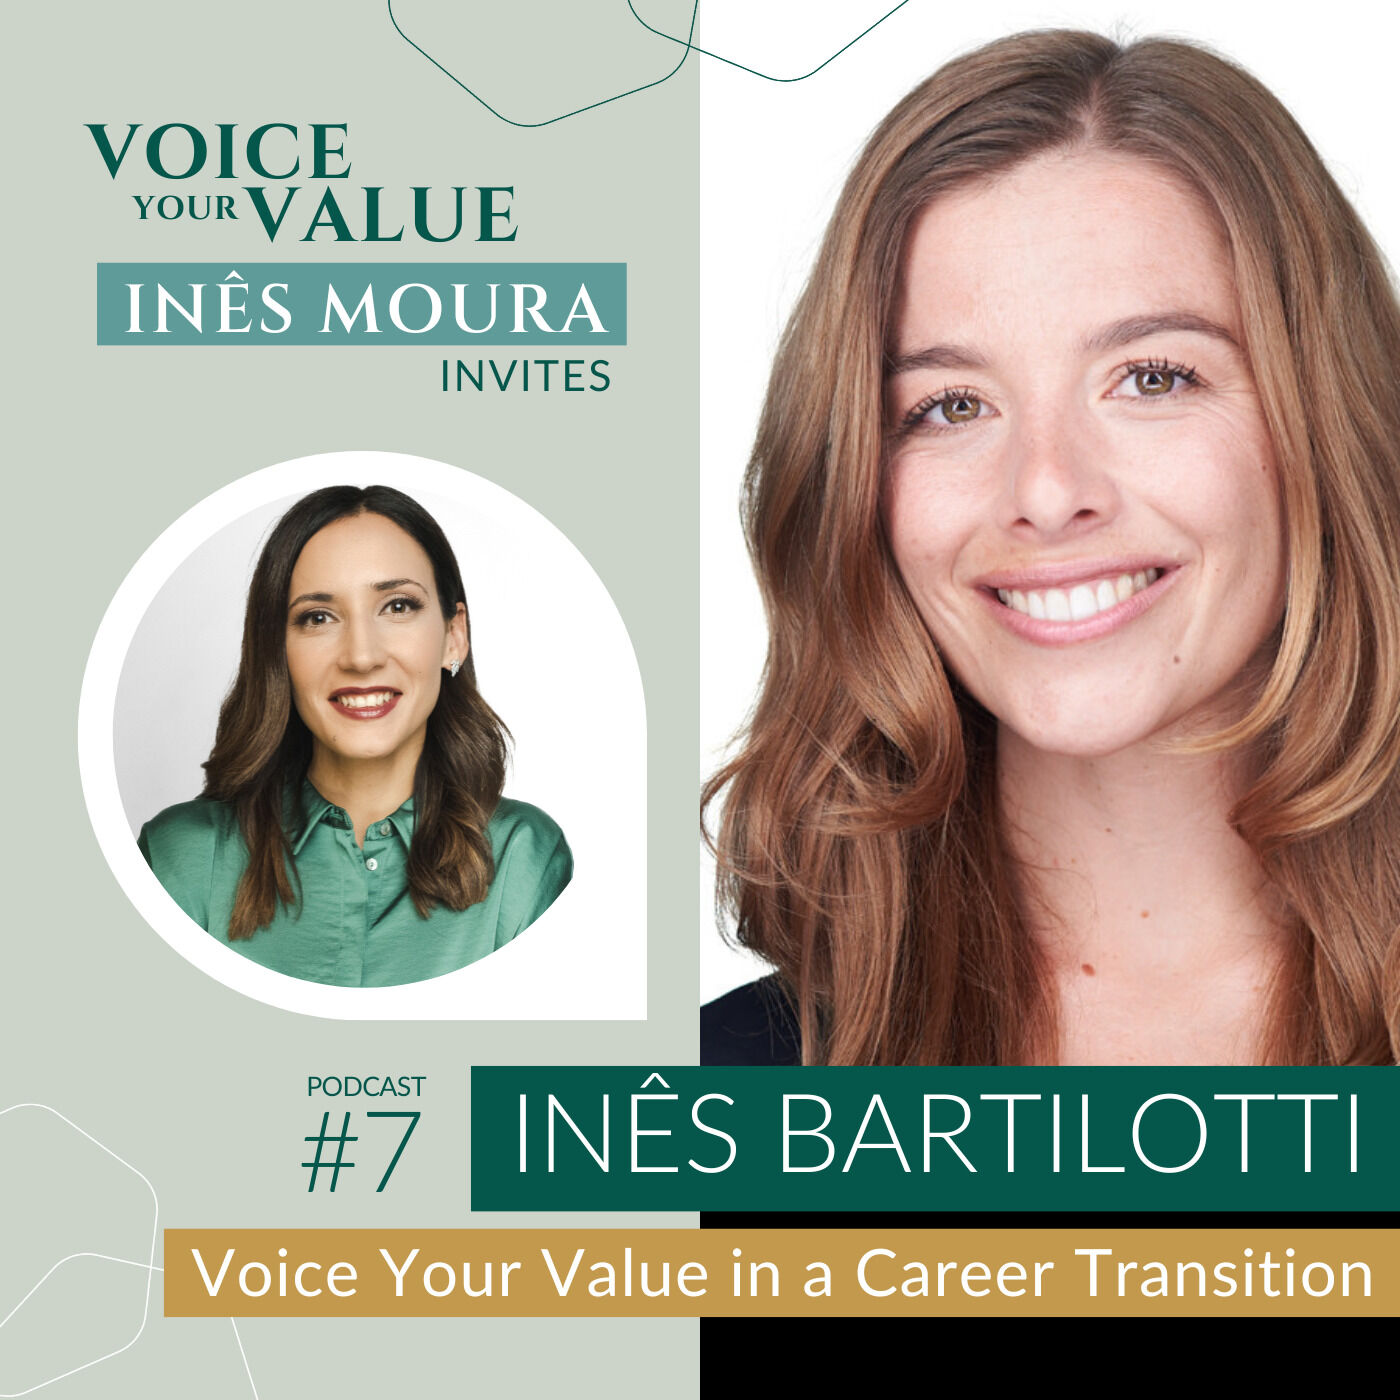 How to Voice Your Value in a Career Transition?